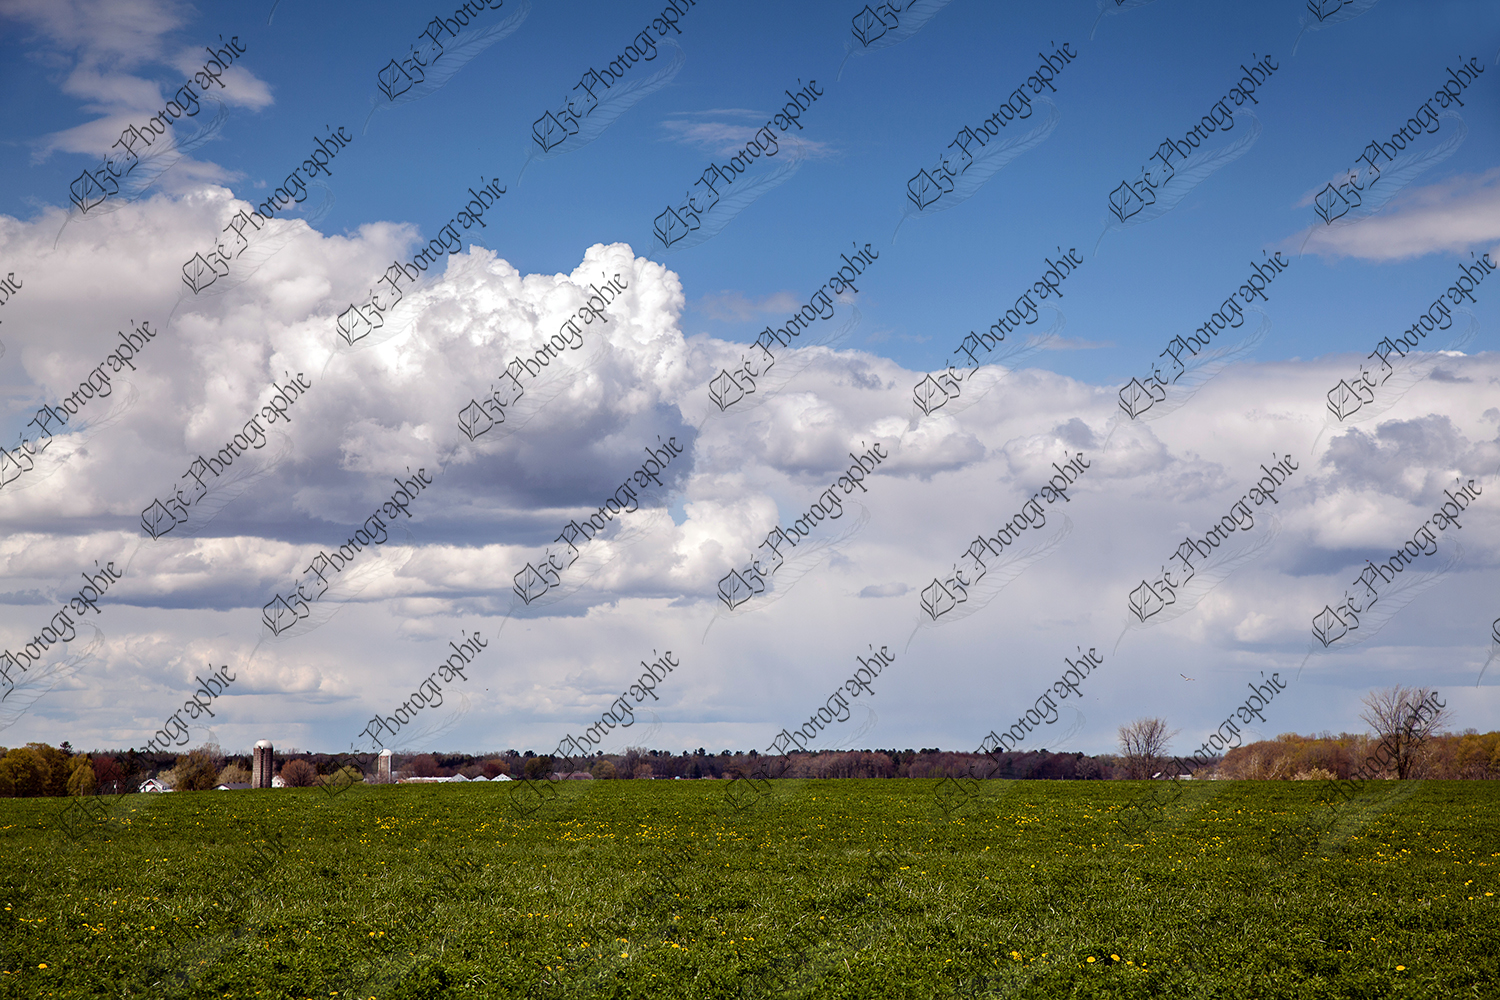 elze_photo_9962_nuages_culture_trefle_green_hay_field